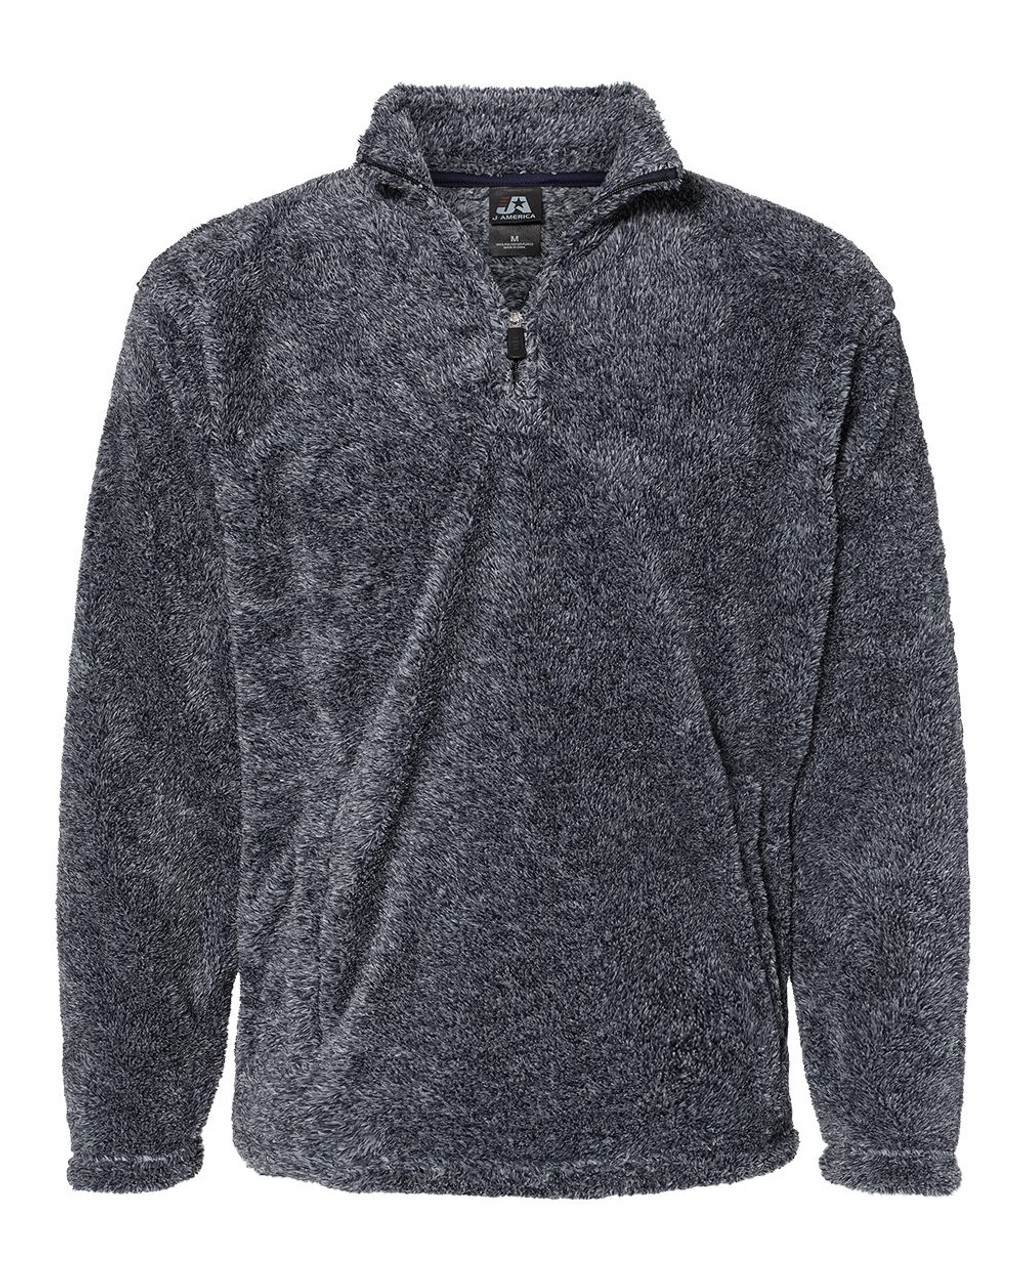 Embroidered Boundary Shag Frosty Sherpa Quarter-Zip Pullover - 8464